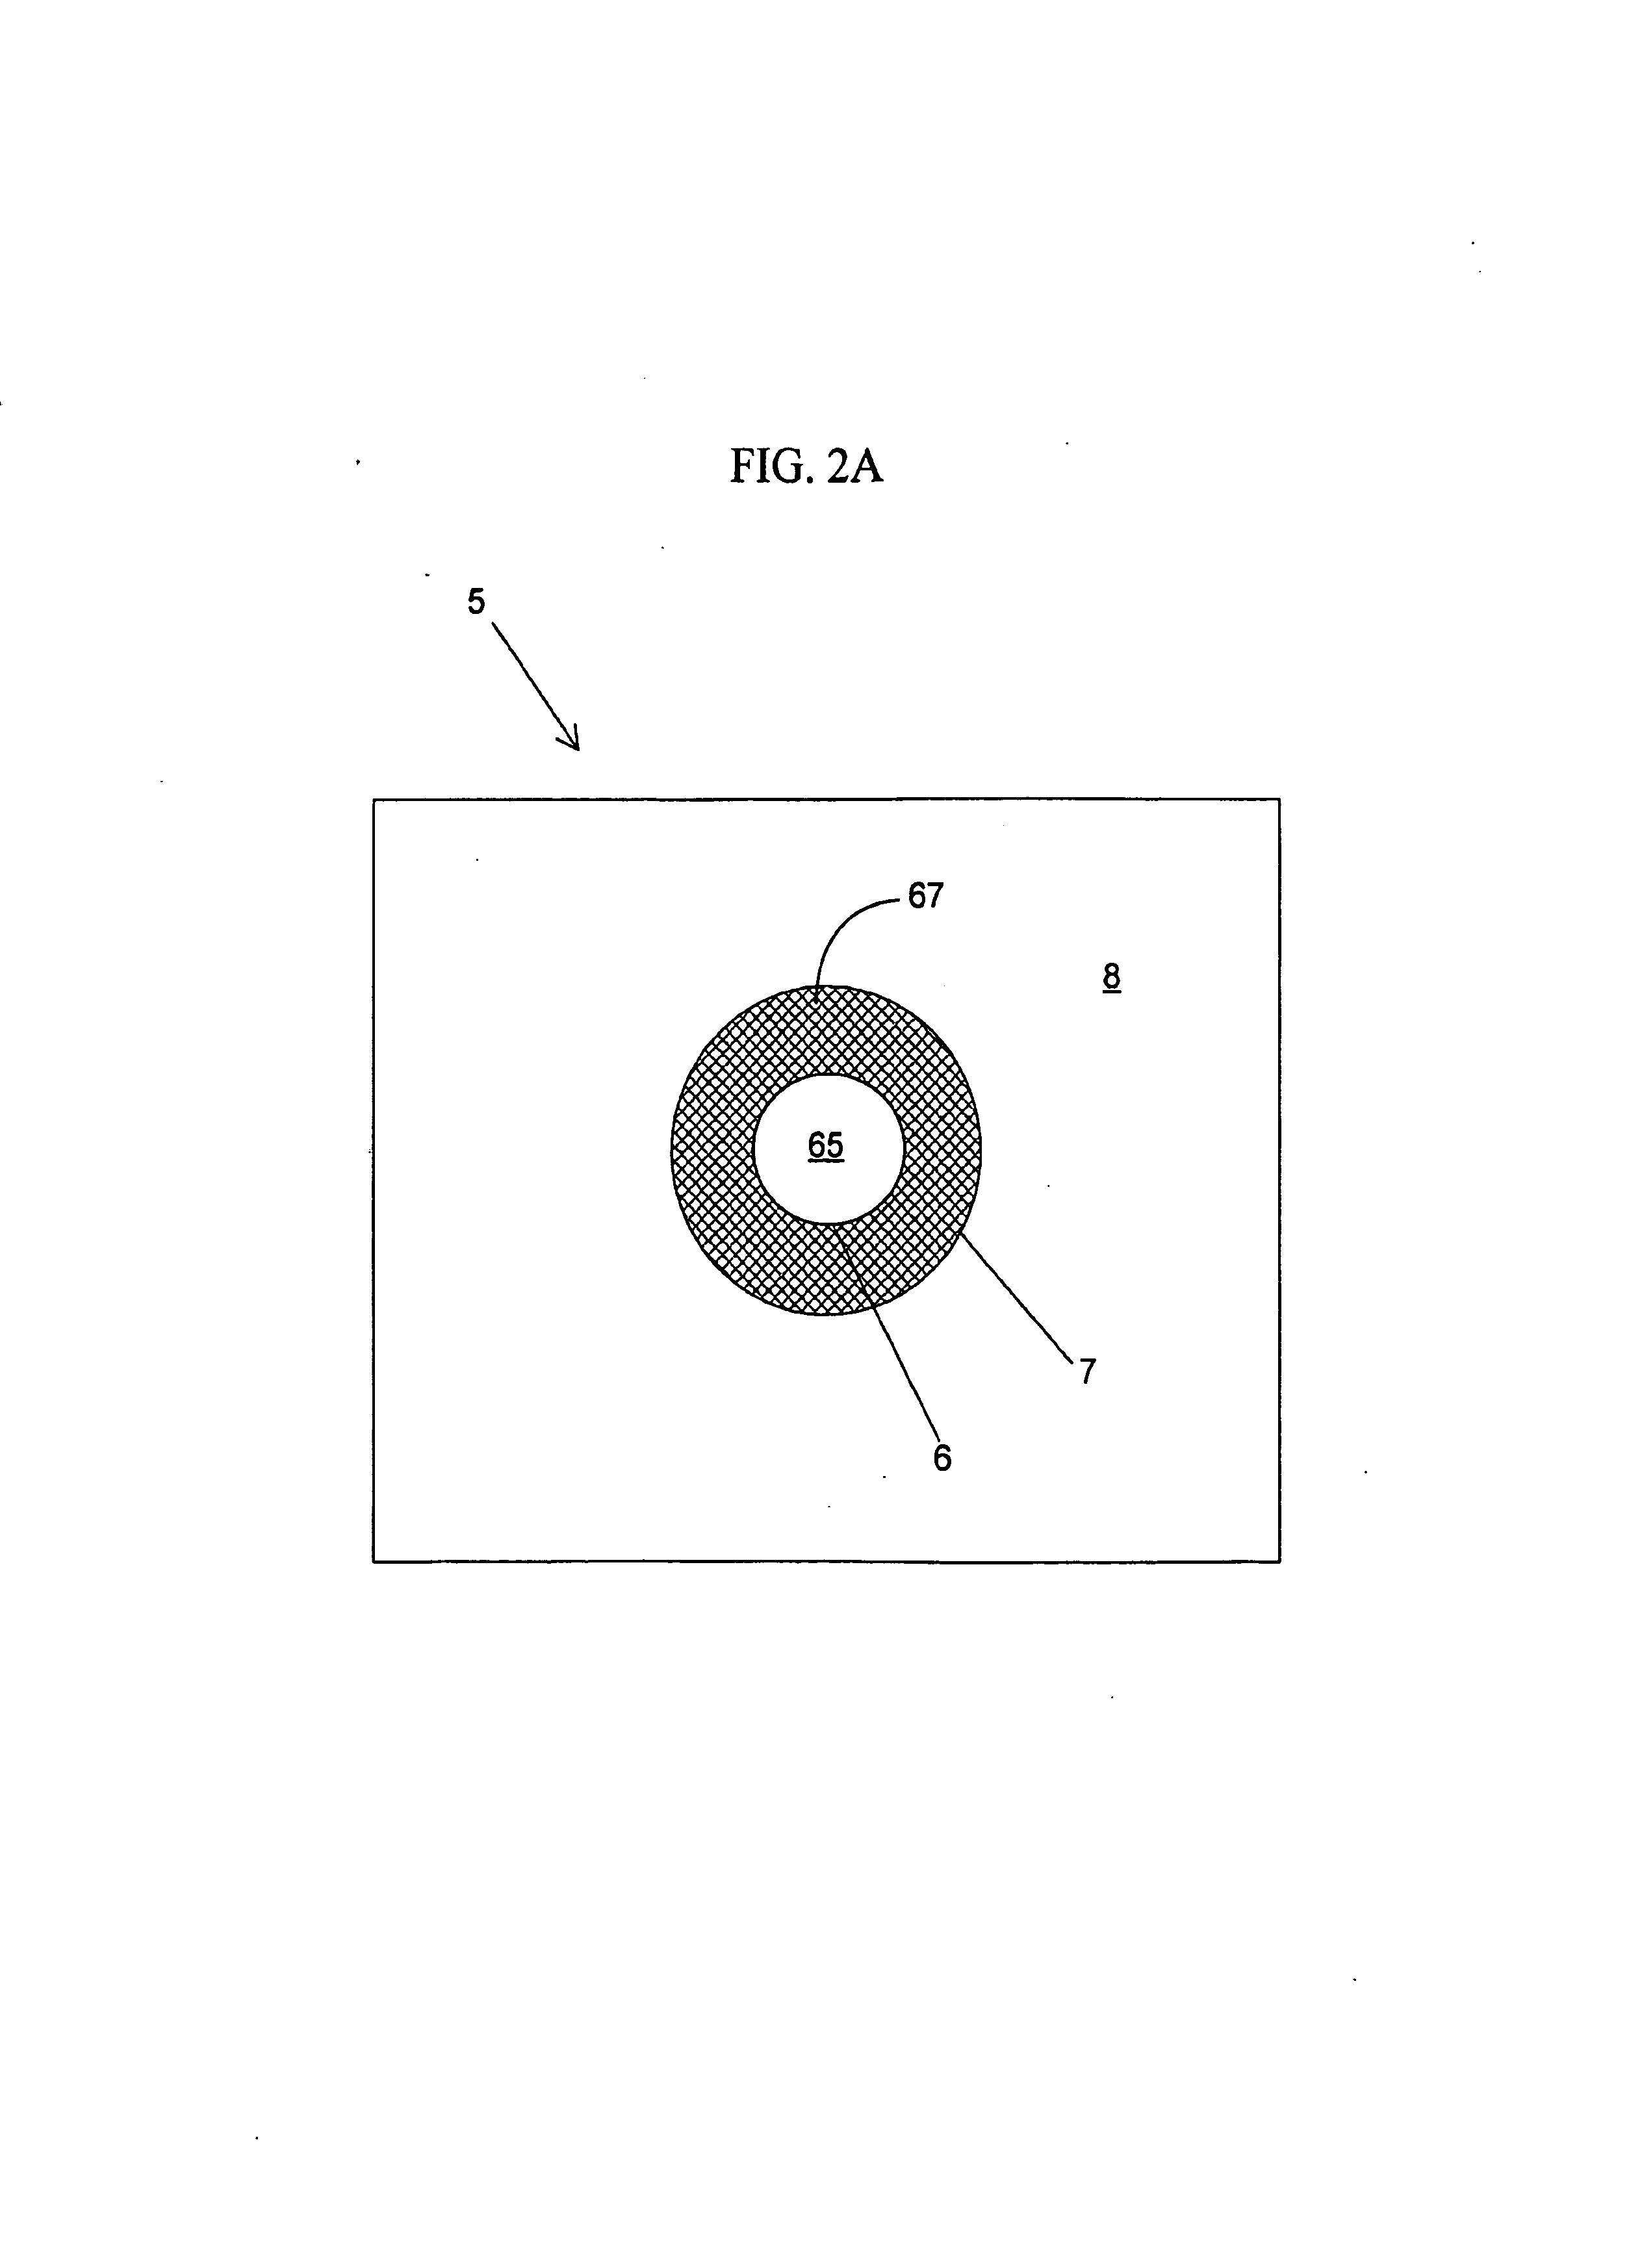 Nondestructive inspection apparatus and method for evaluating cold working effectiveness at fastener holes